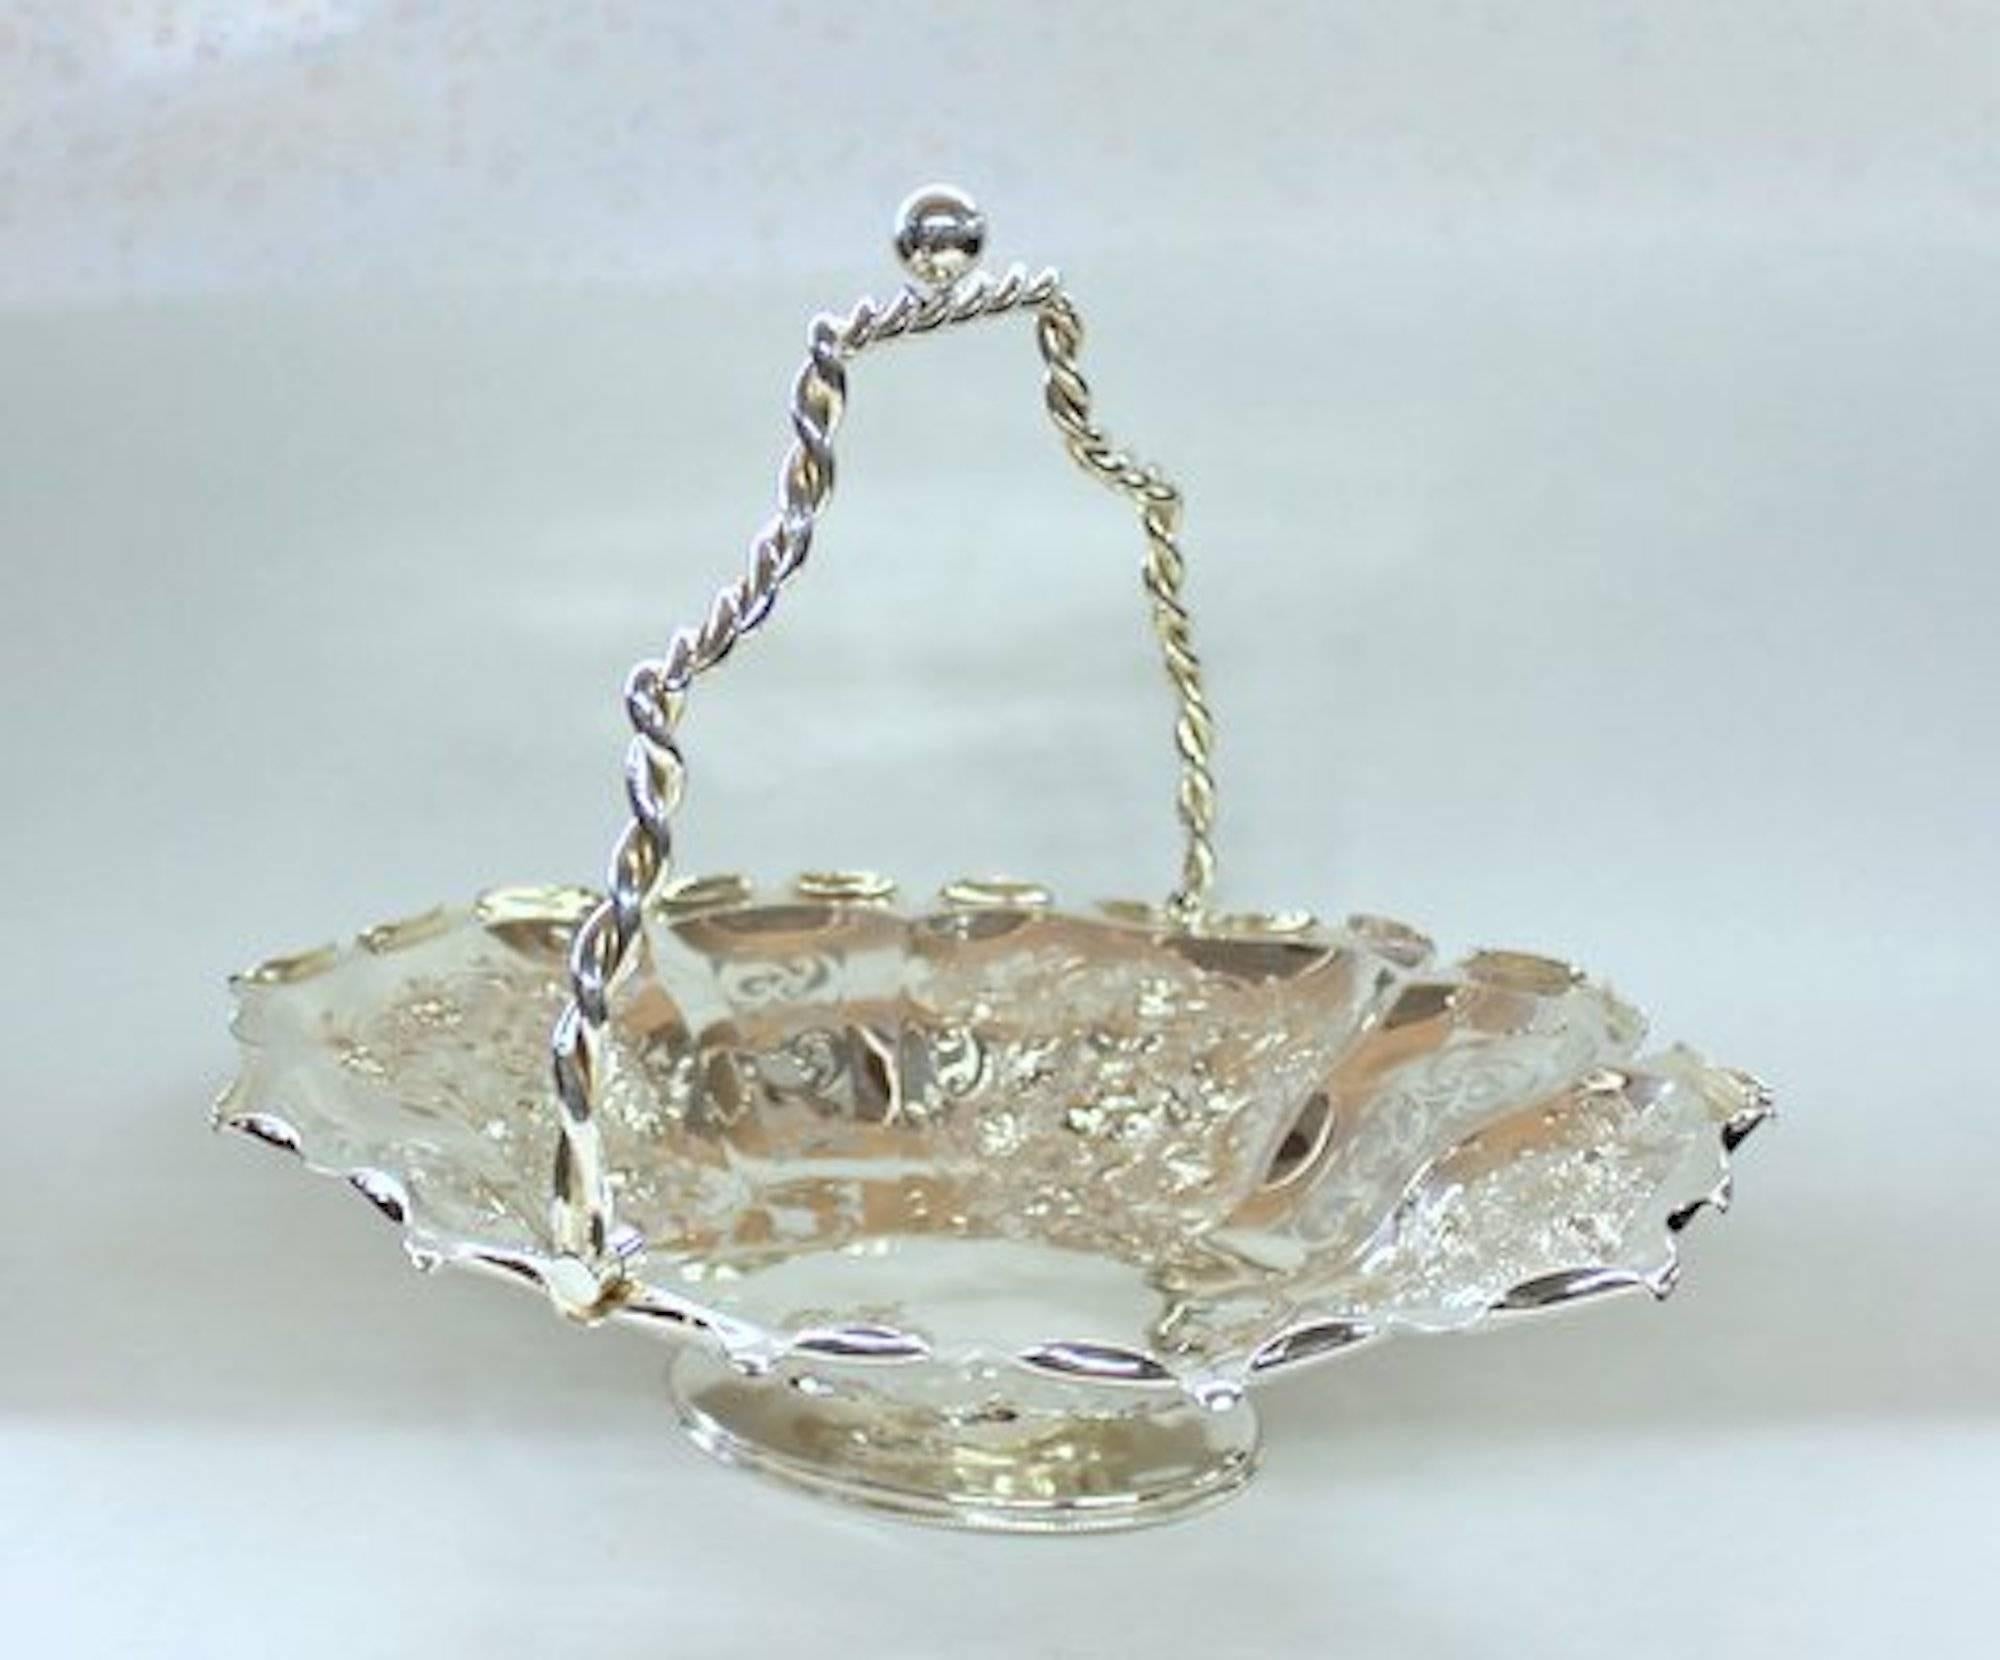 19th Century English Silver Plated, Pierced Oblong Cake or Bread Basket 1